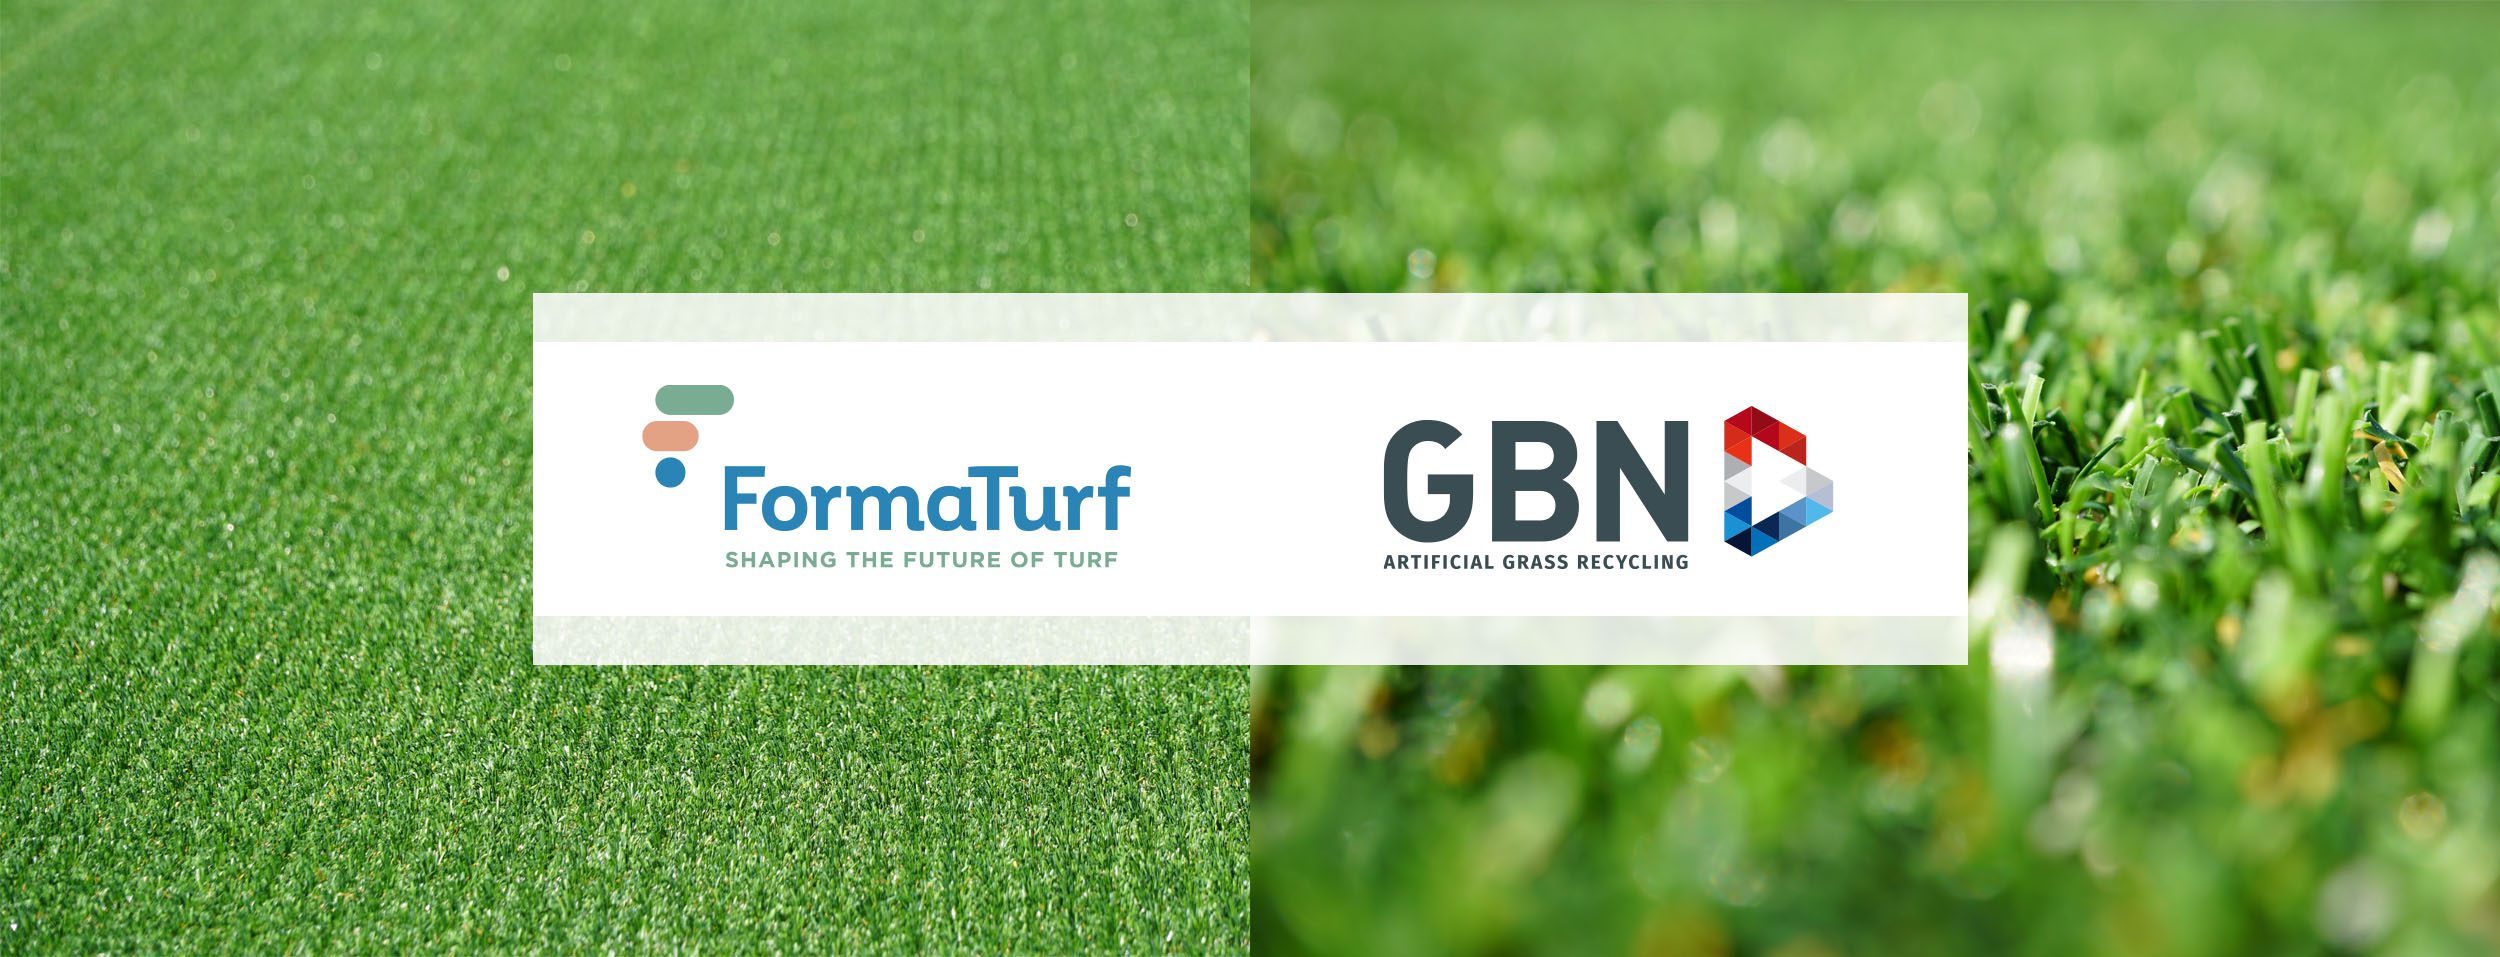 Artificial Turf Industry leaders cooperate to provide stronger artificial grass recycling solution